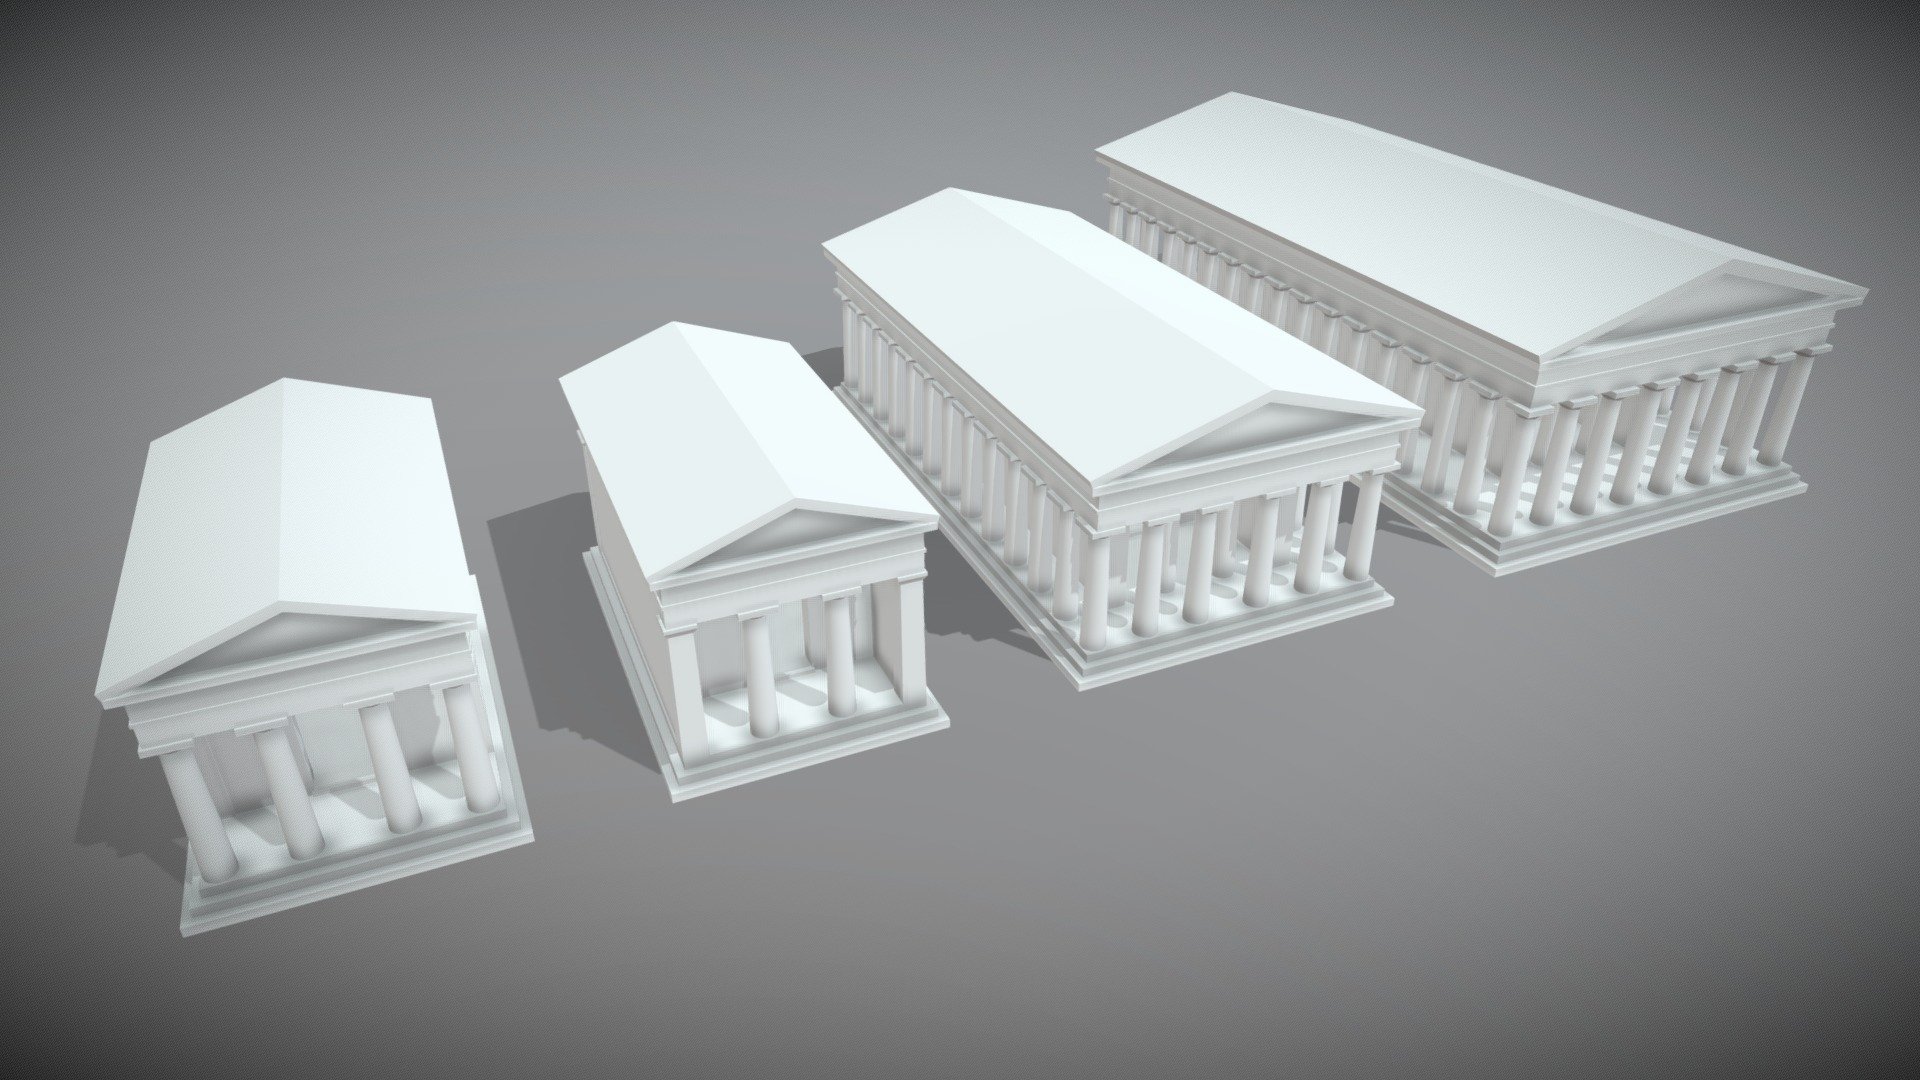 Low poly models of 4 ancient Greek temple types of the doric architectural order:
Prostyle, amphiprostype, peripteral and pseudodipteral temples.
Low poly models with no textures, ideal for presentations of architectural and educational content 3d model